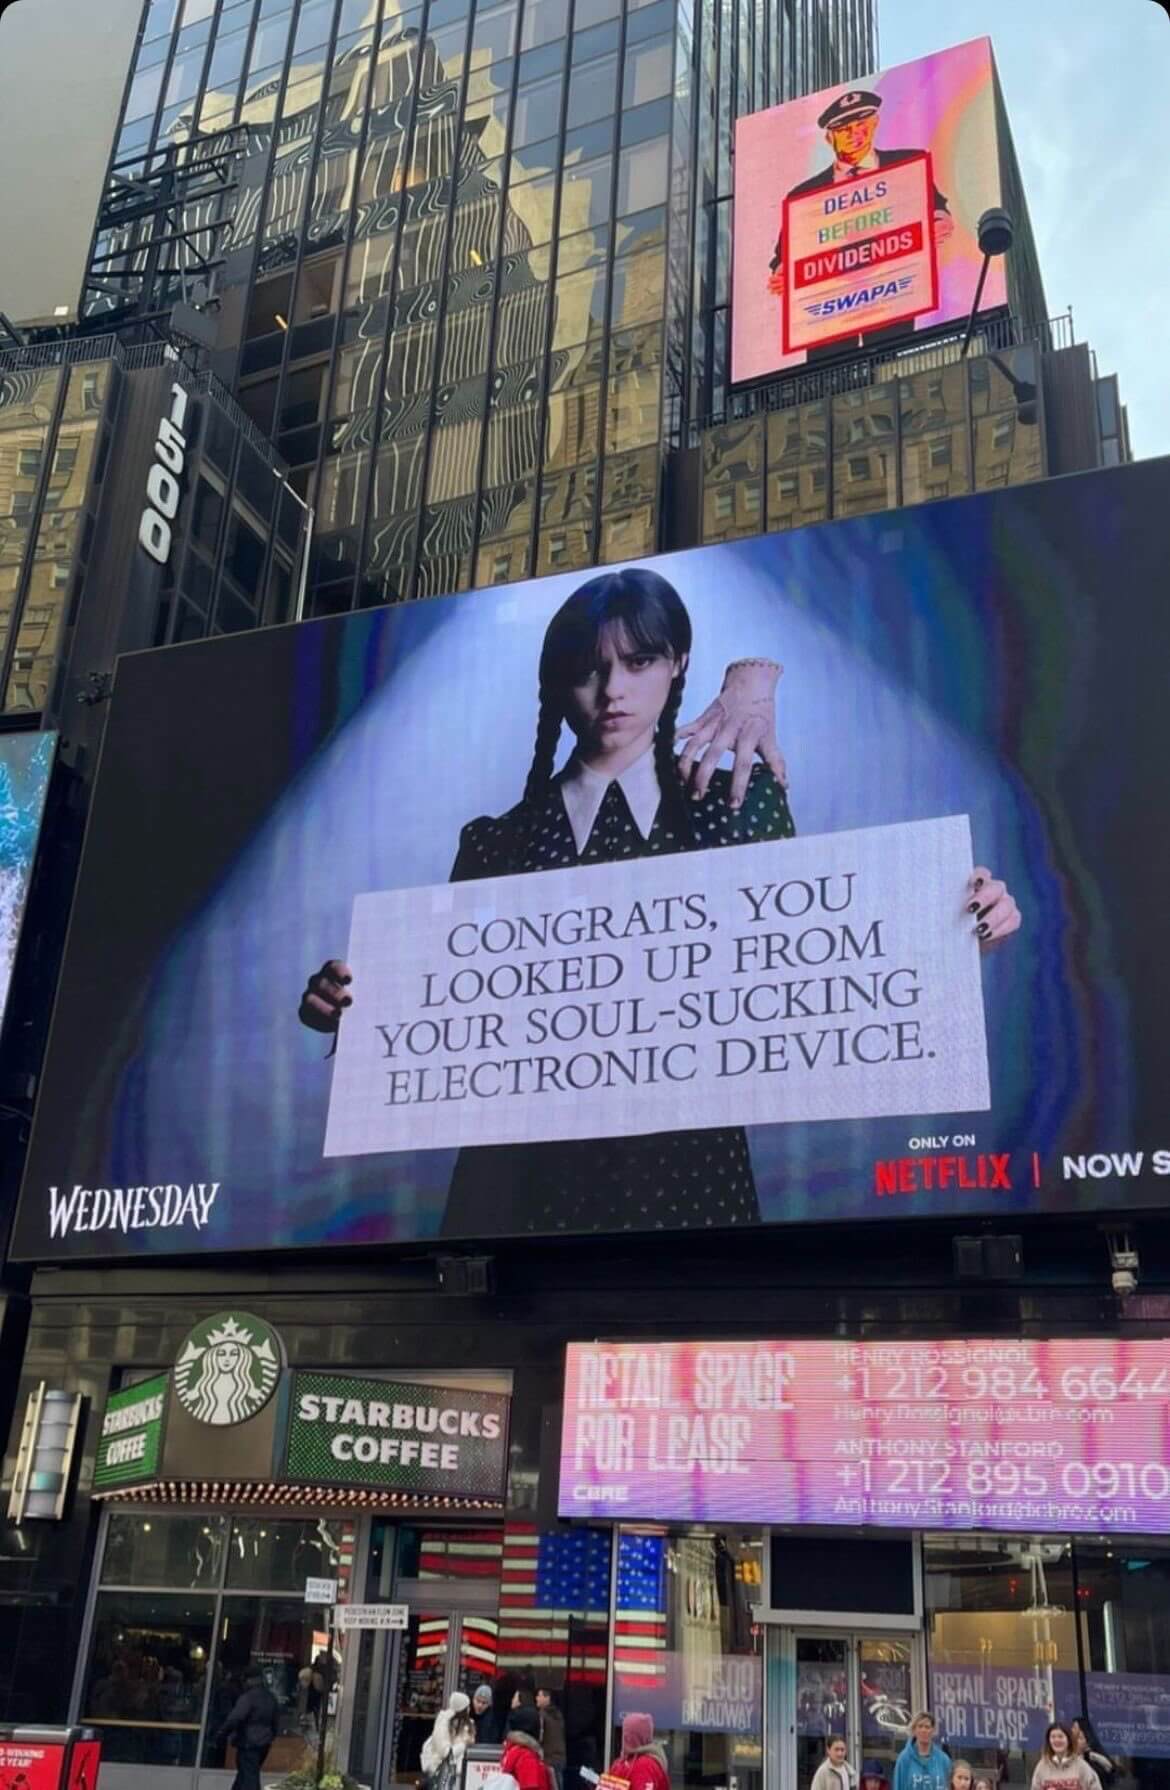 Outdoor banner promoting the Netflix series Wednesday, showing a photo of the main character holding a piece of paper which reads "Congrats, you looked up from your sould-sucking electronic device."